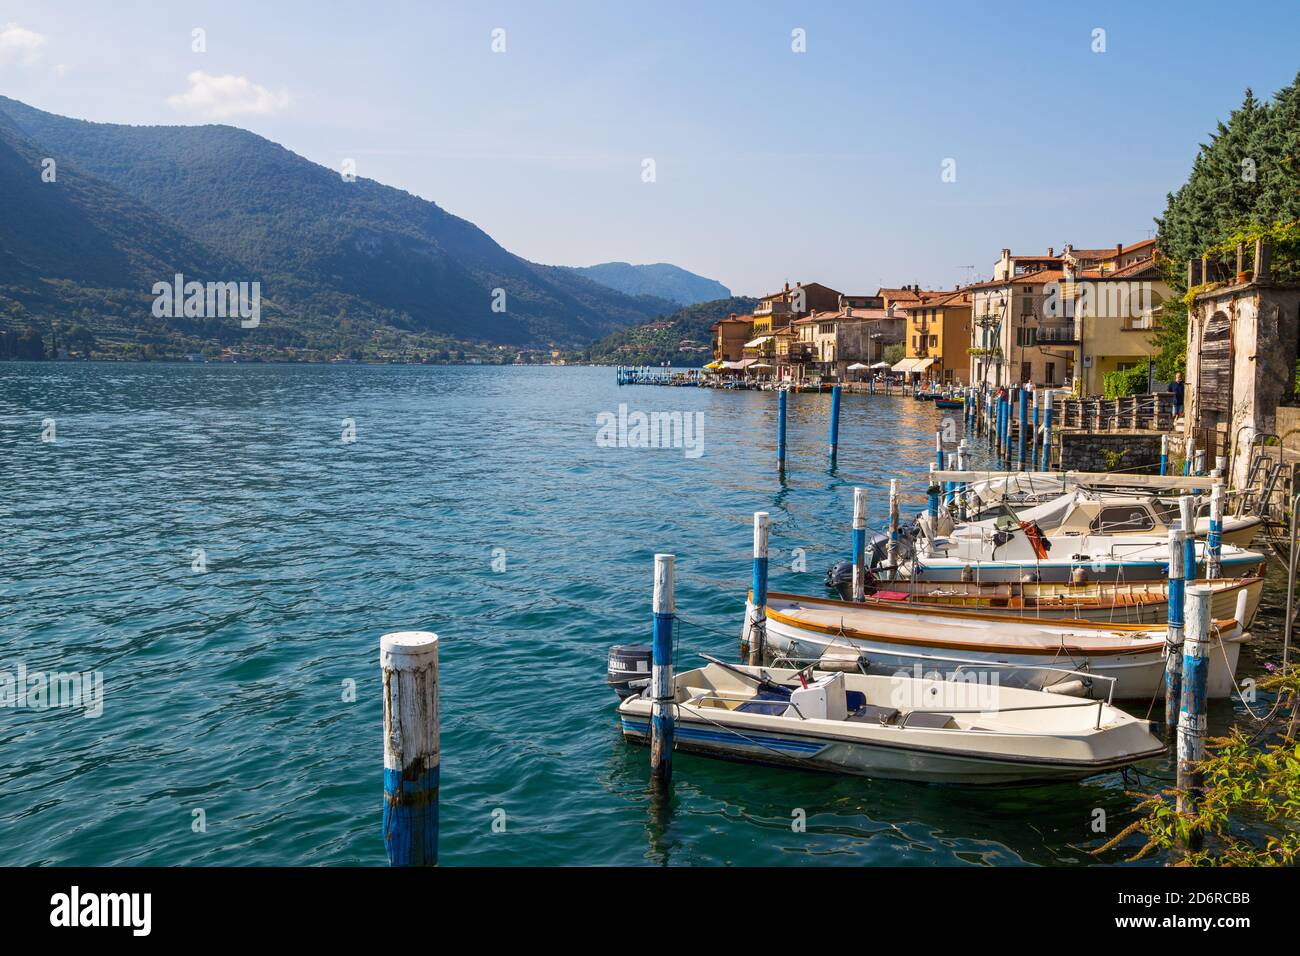 View of Monte Isola, Iseo Lake, Brescia province, Lombardy, Italy. Stock Photo